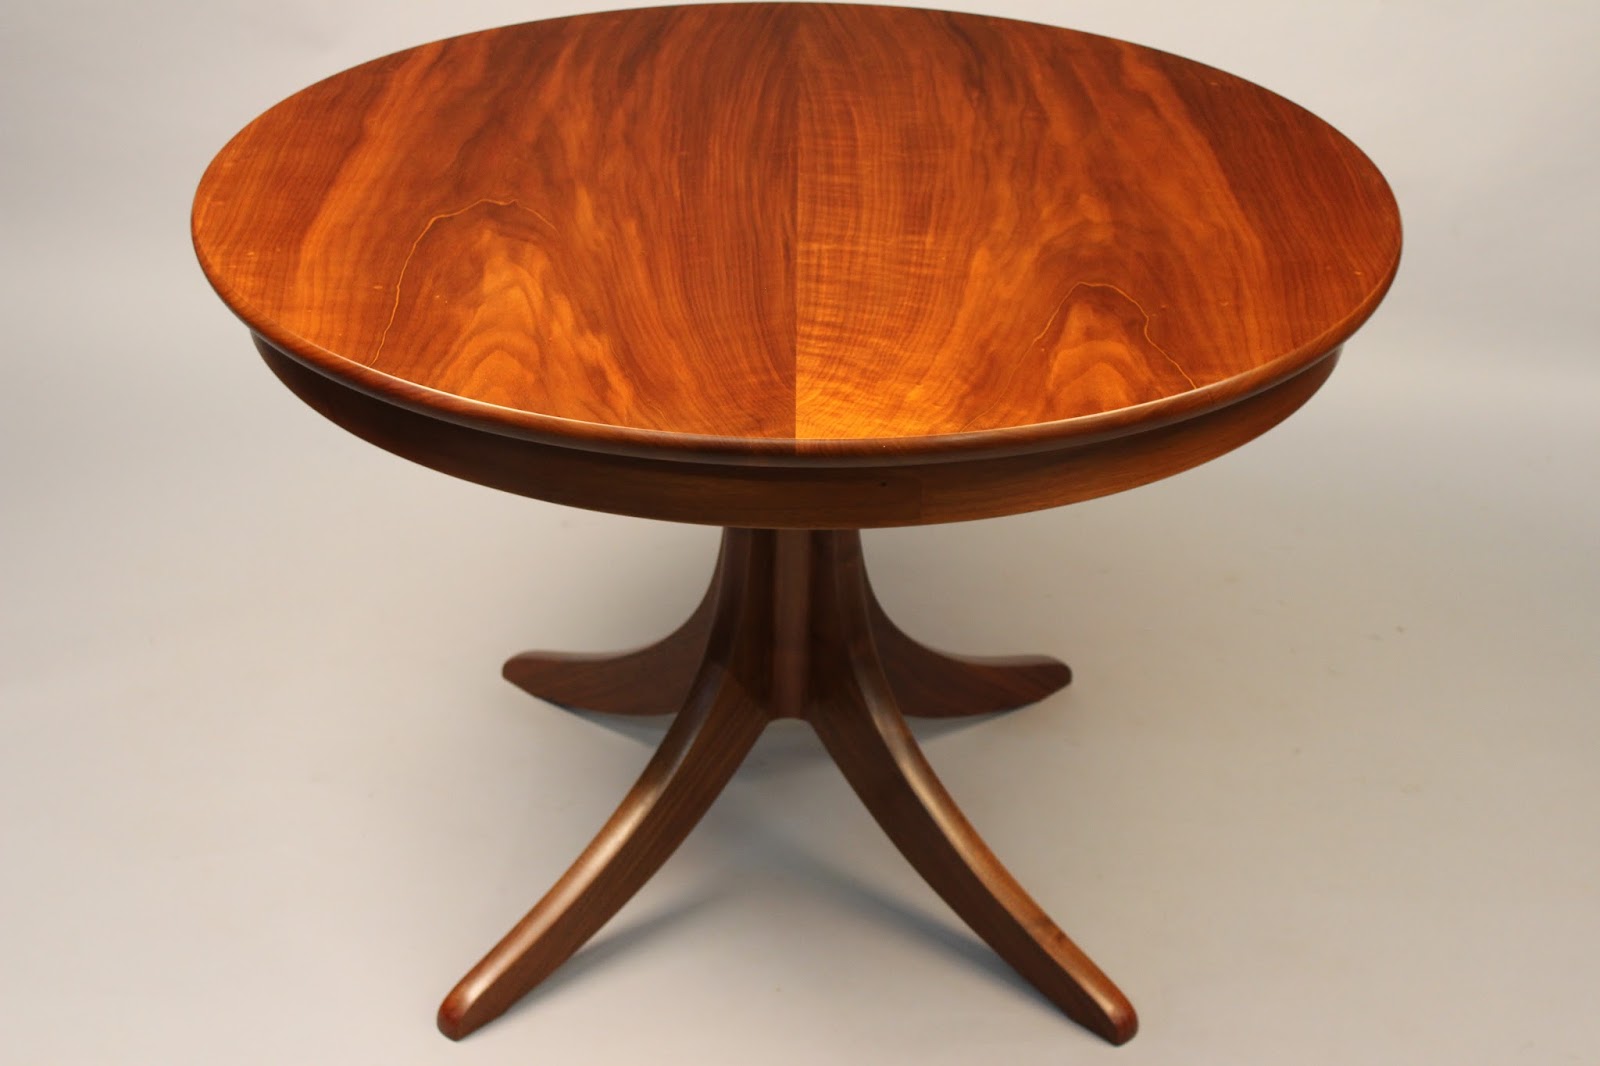 Pedestal table handcrafted of walnut